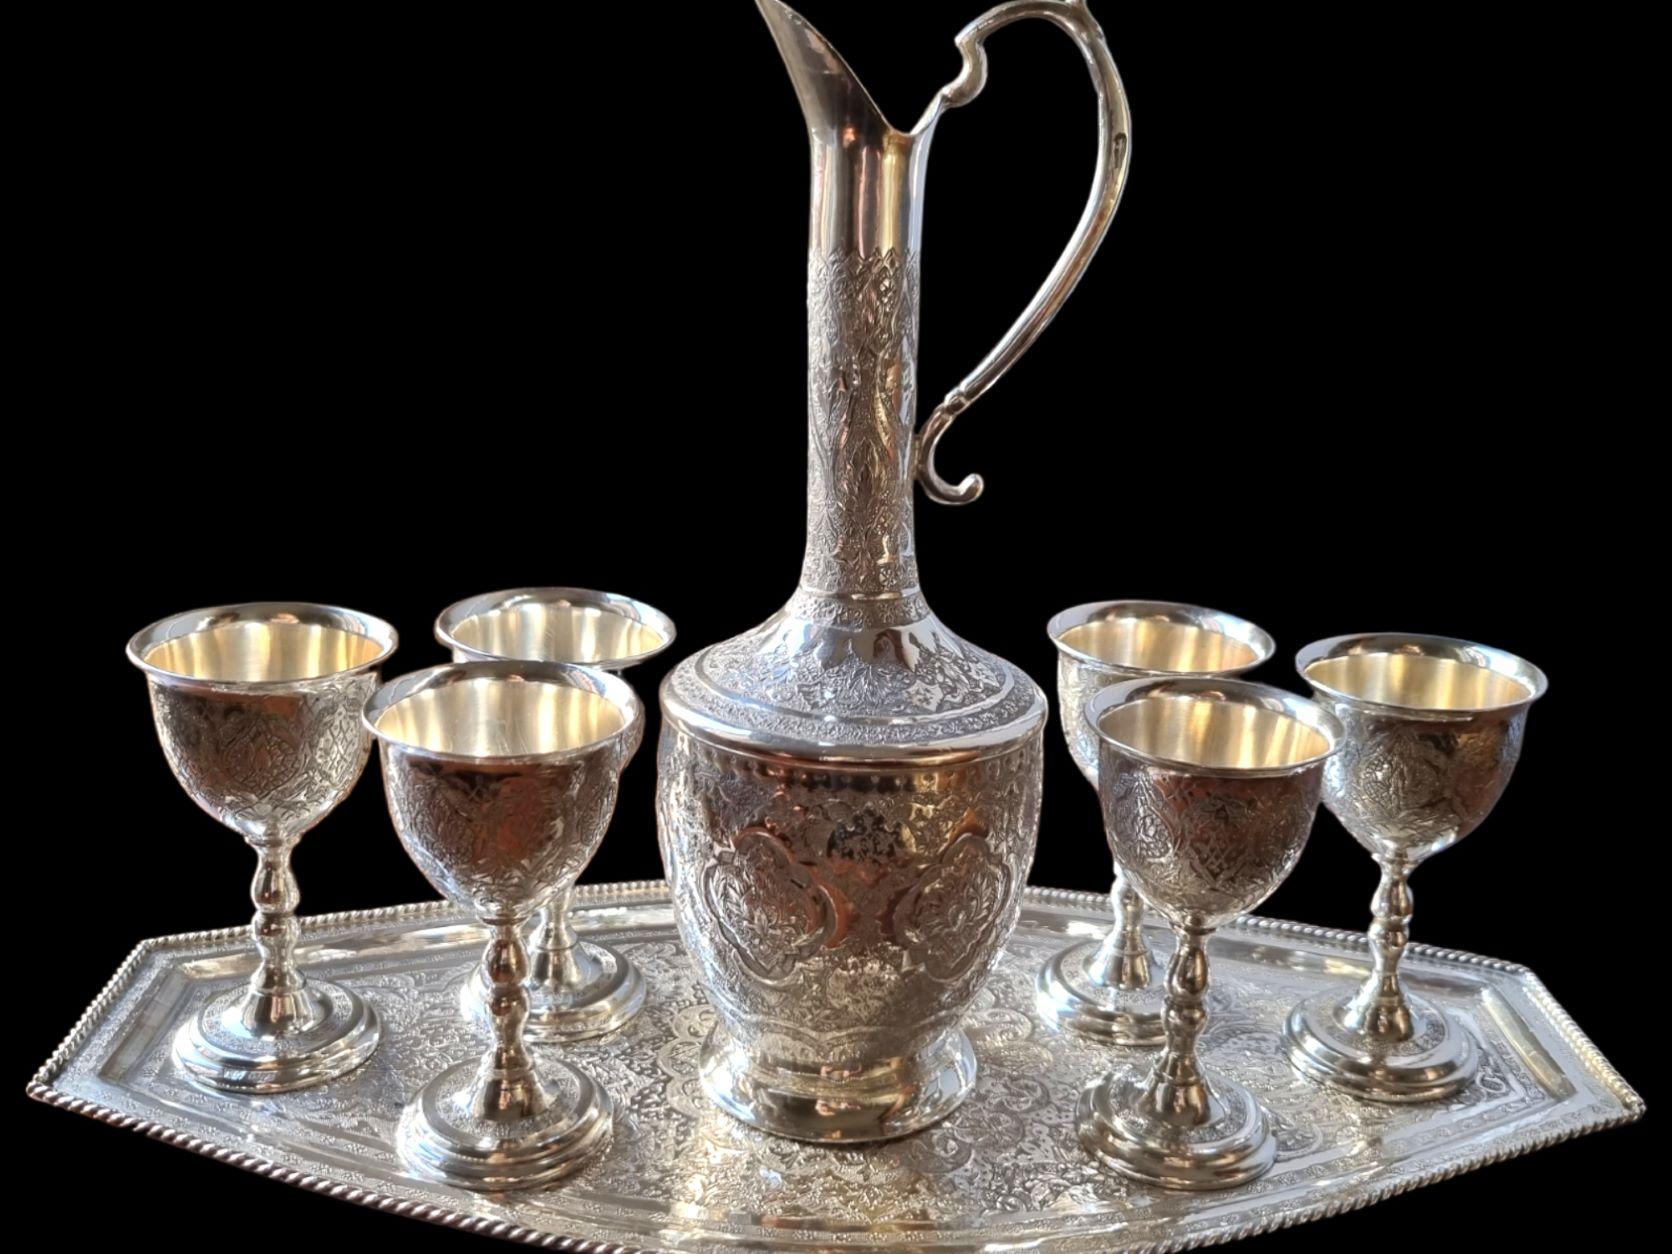 First Half 20th Century Persian Islamic Solid Silver drinking set, comprising of a Jug and six goblets on a tray, each piece profusely engraved and chased with typically Persian arabesque decoration, the jug has a long sinuous neck and cast